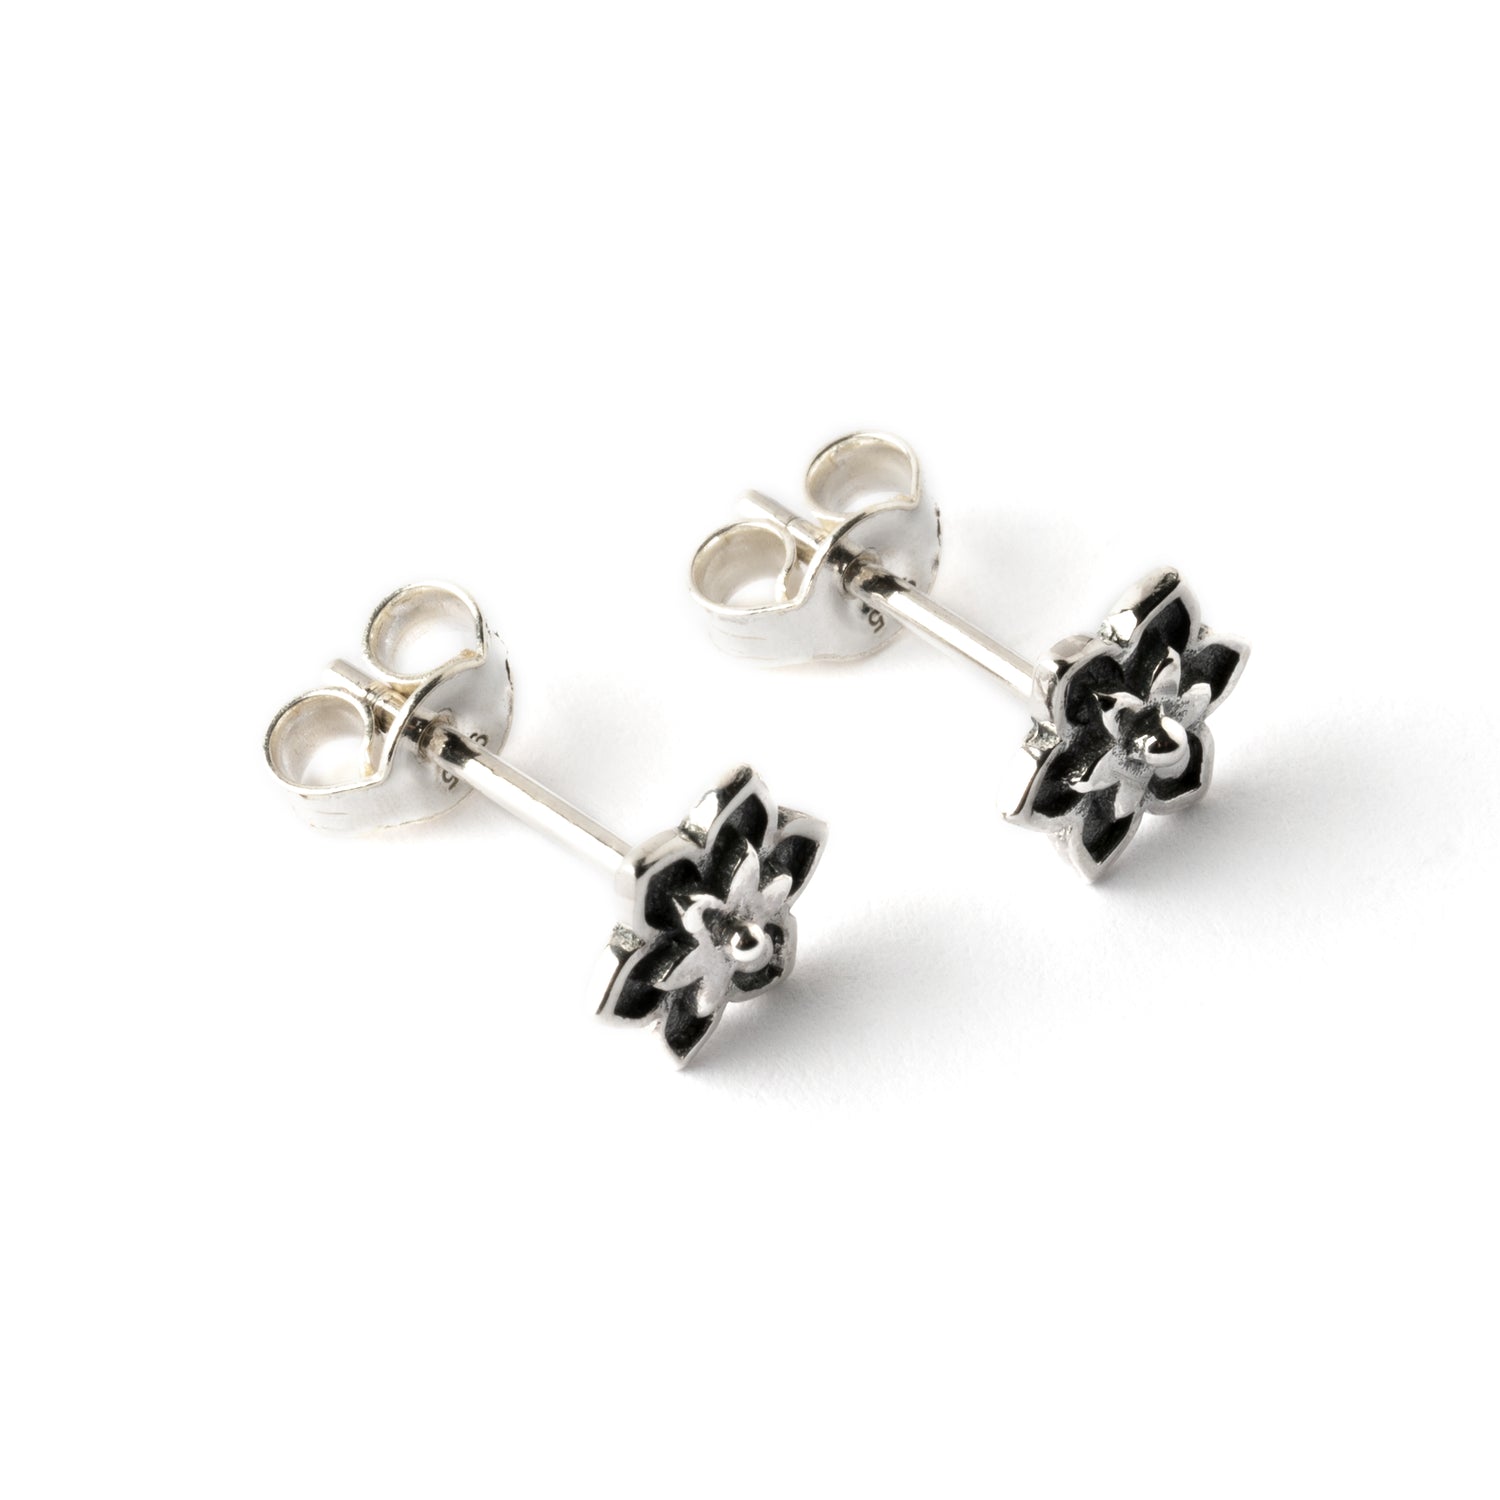 Narcissus-silver-stud-earrings_2